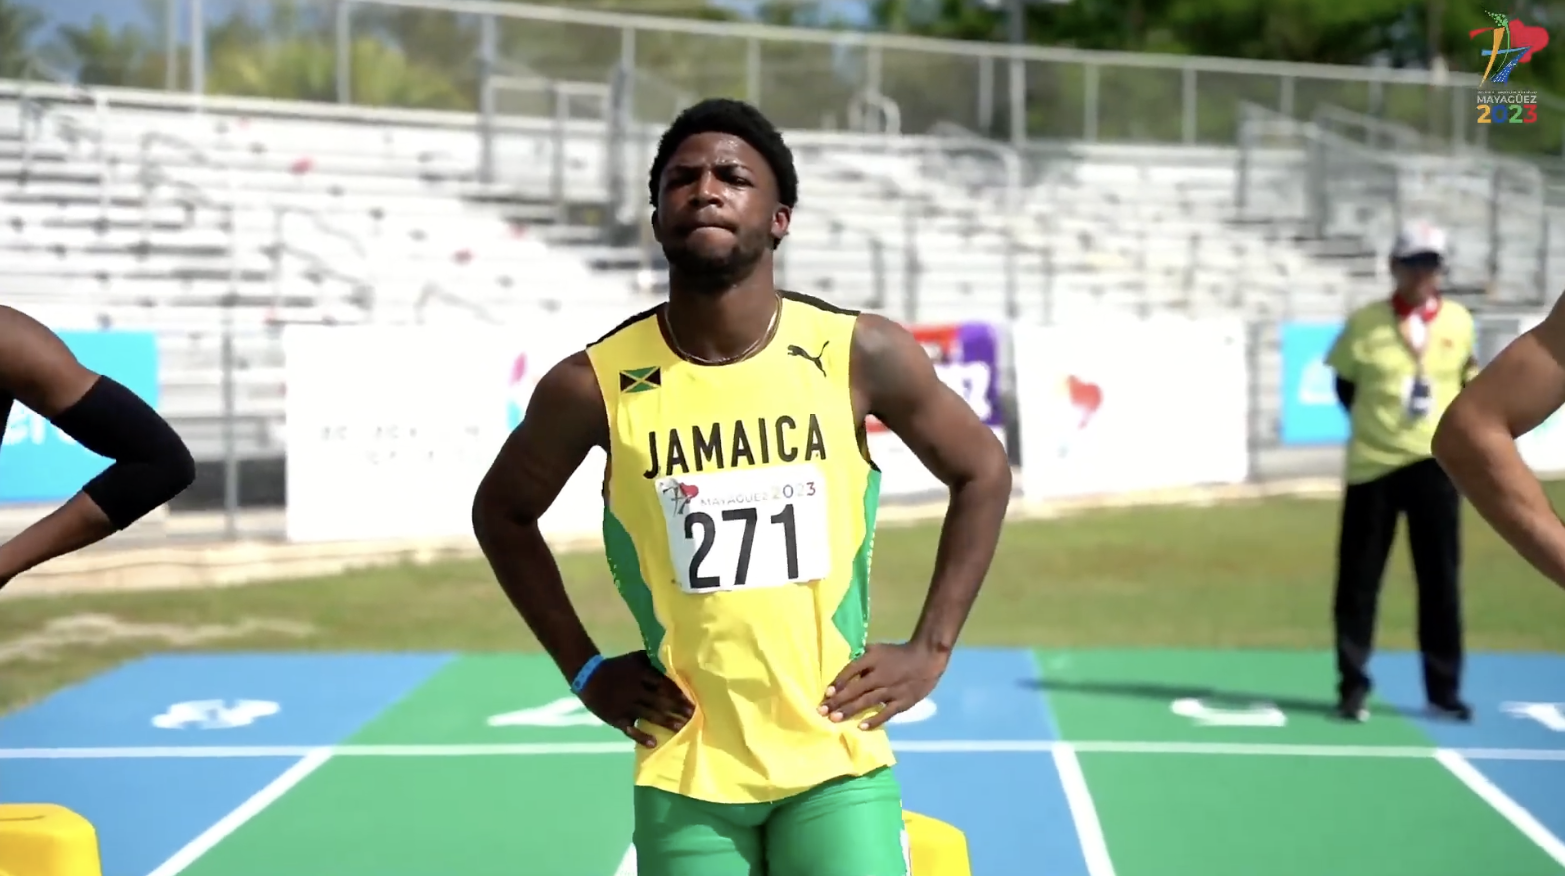 Bouwahjgie Nkrumie of Jamaica made a powerful statement in the men's 100 meters qualifiers at the 2023 Pan American U20 Championships in Mayagüez, Puerto Rico